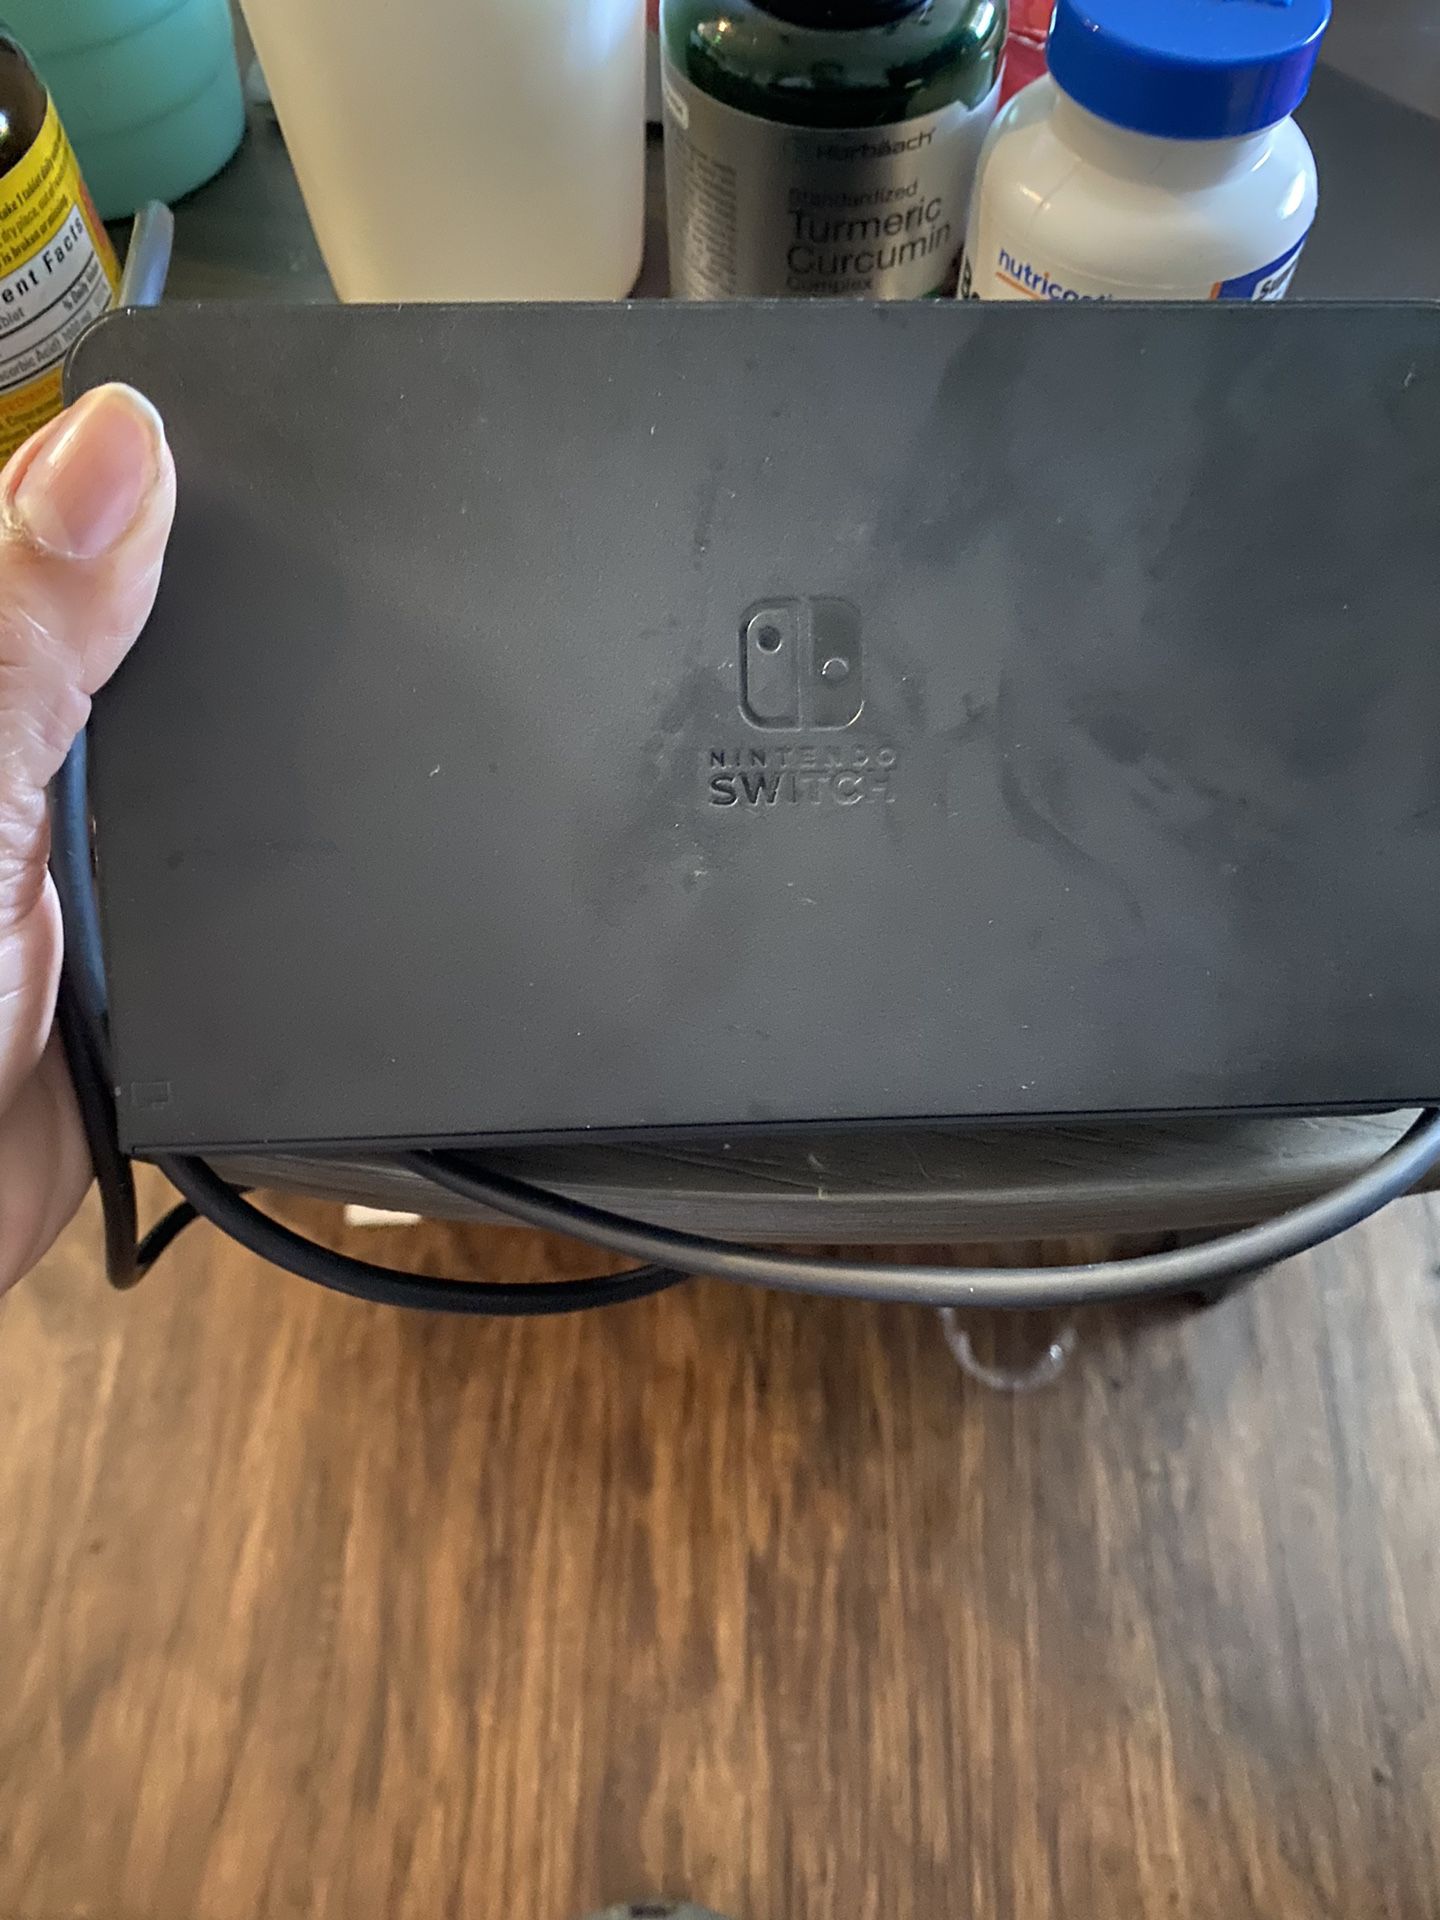 Used Nintendo Switch Charging Dock Without Charging Outlet 